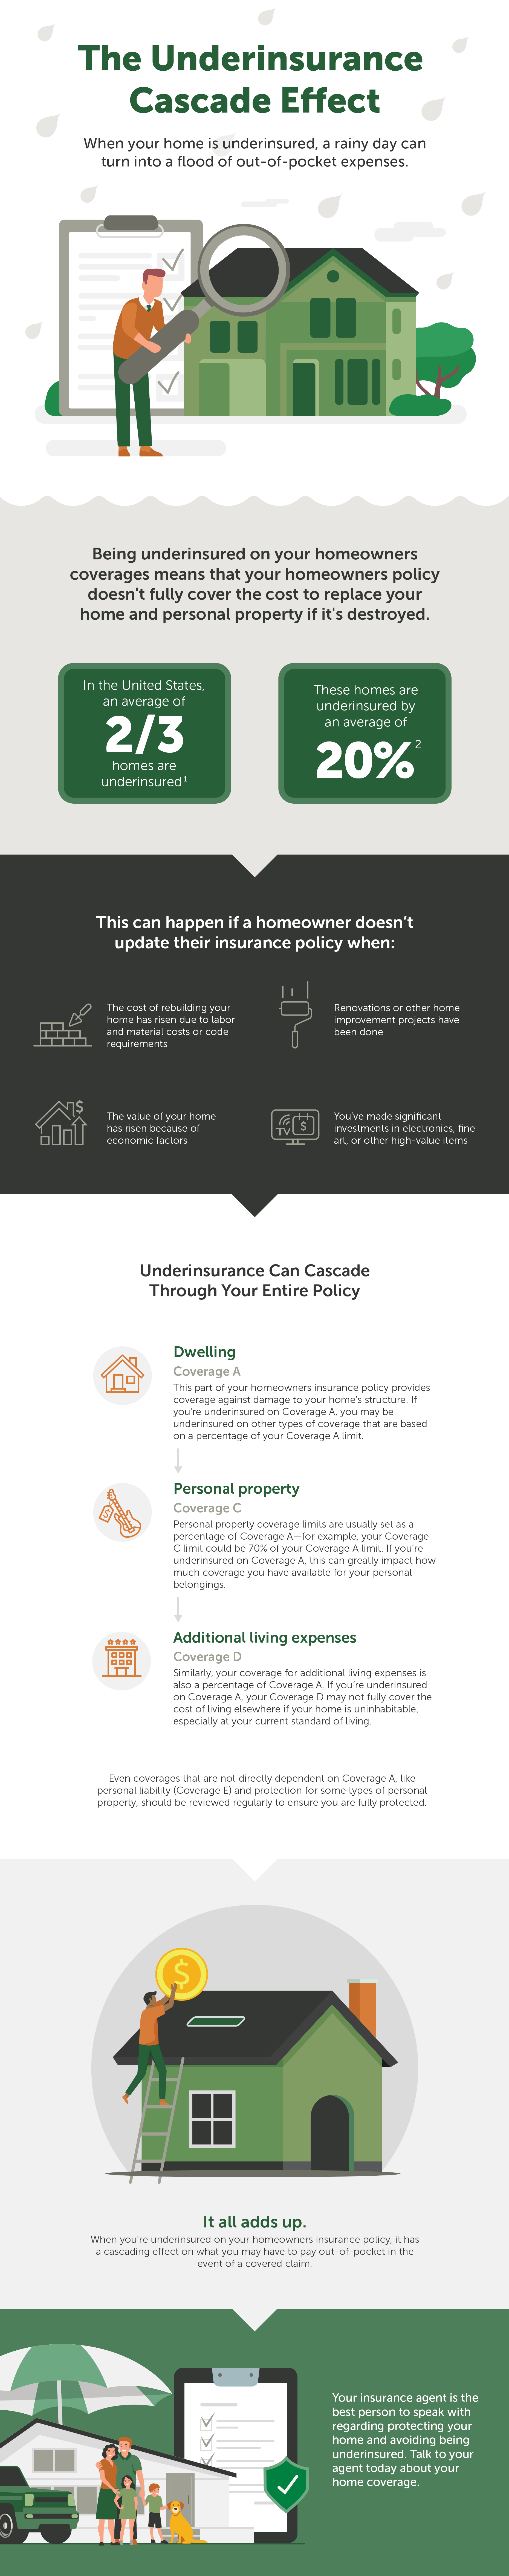 Image of infographic titled The Underinsurance Cascade Effect. See second link below image for text only accessible PDF. PDF does not open in a new tab or window.